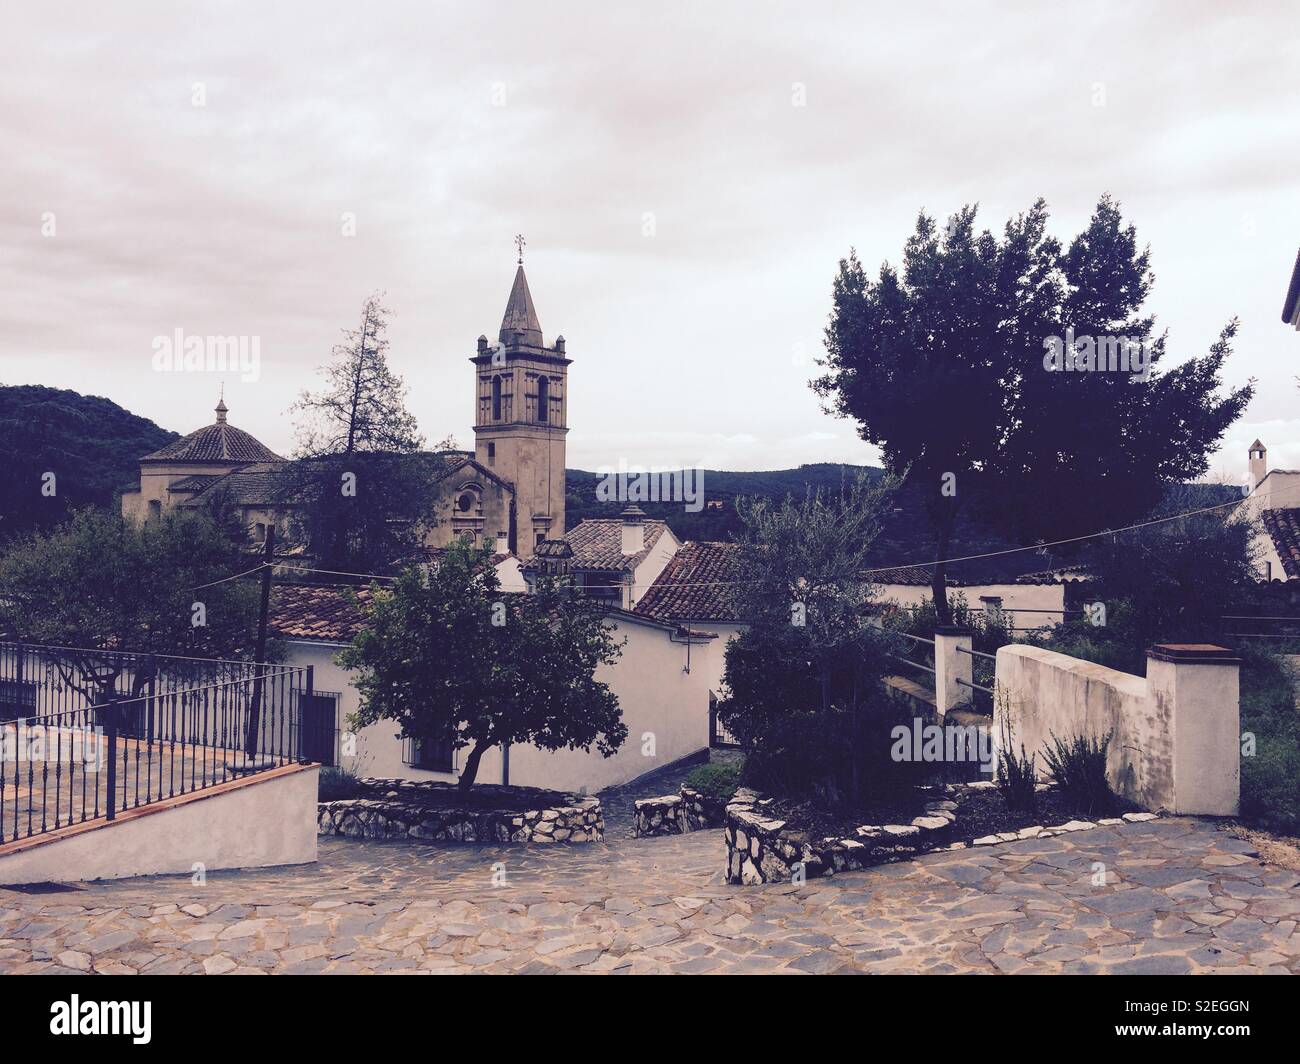 Landscape view of a village in Andalucia Spain with a church steeple in the background and houses in front Stock Photo